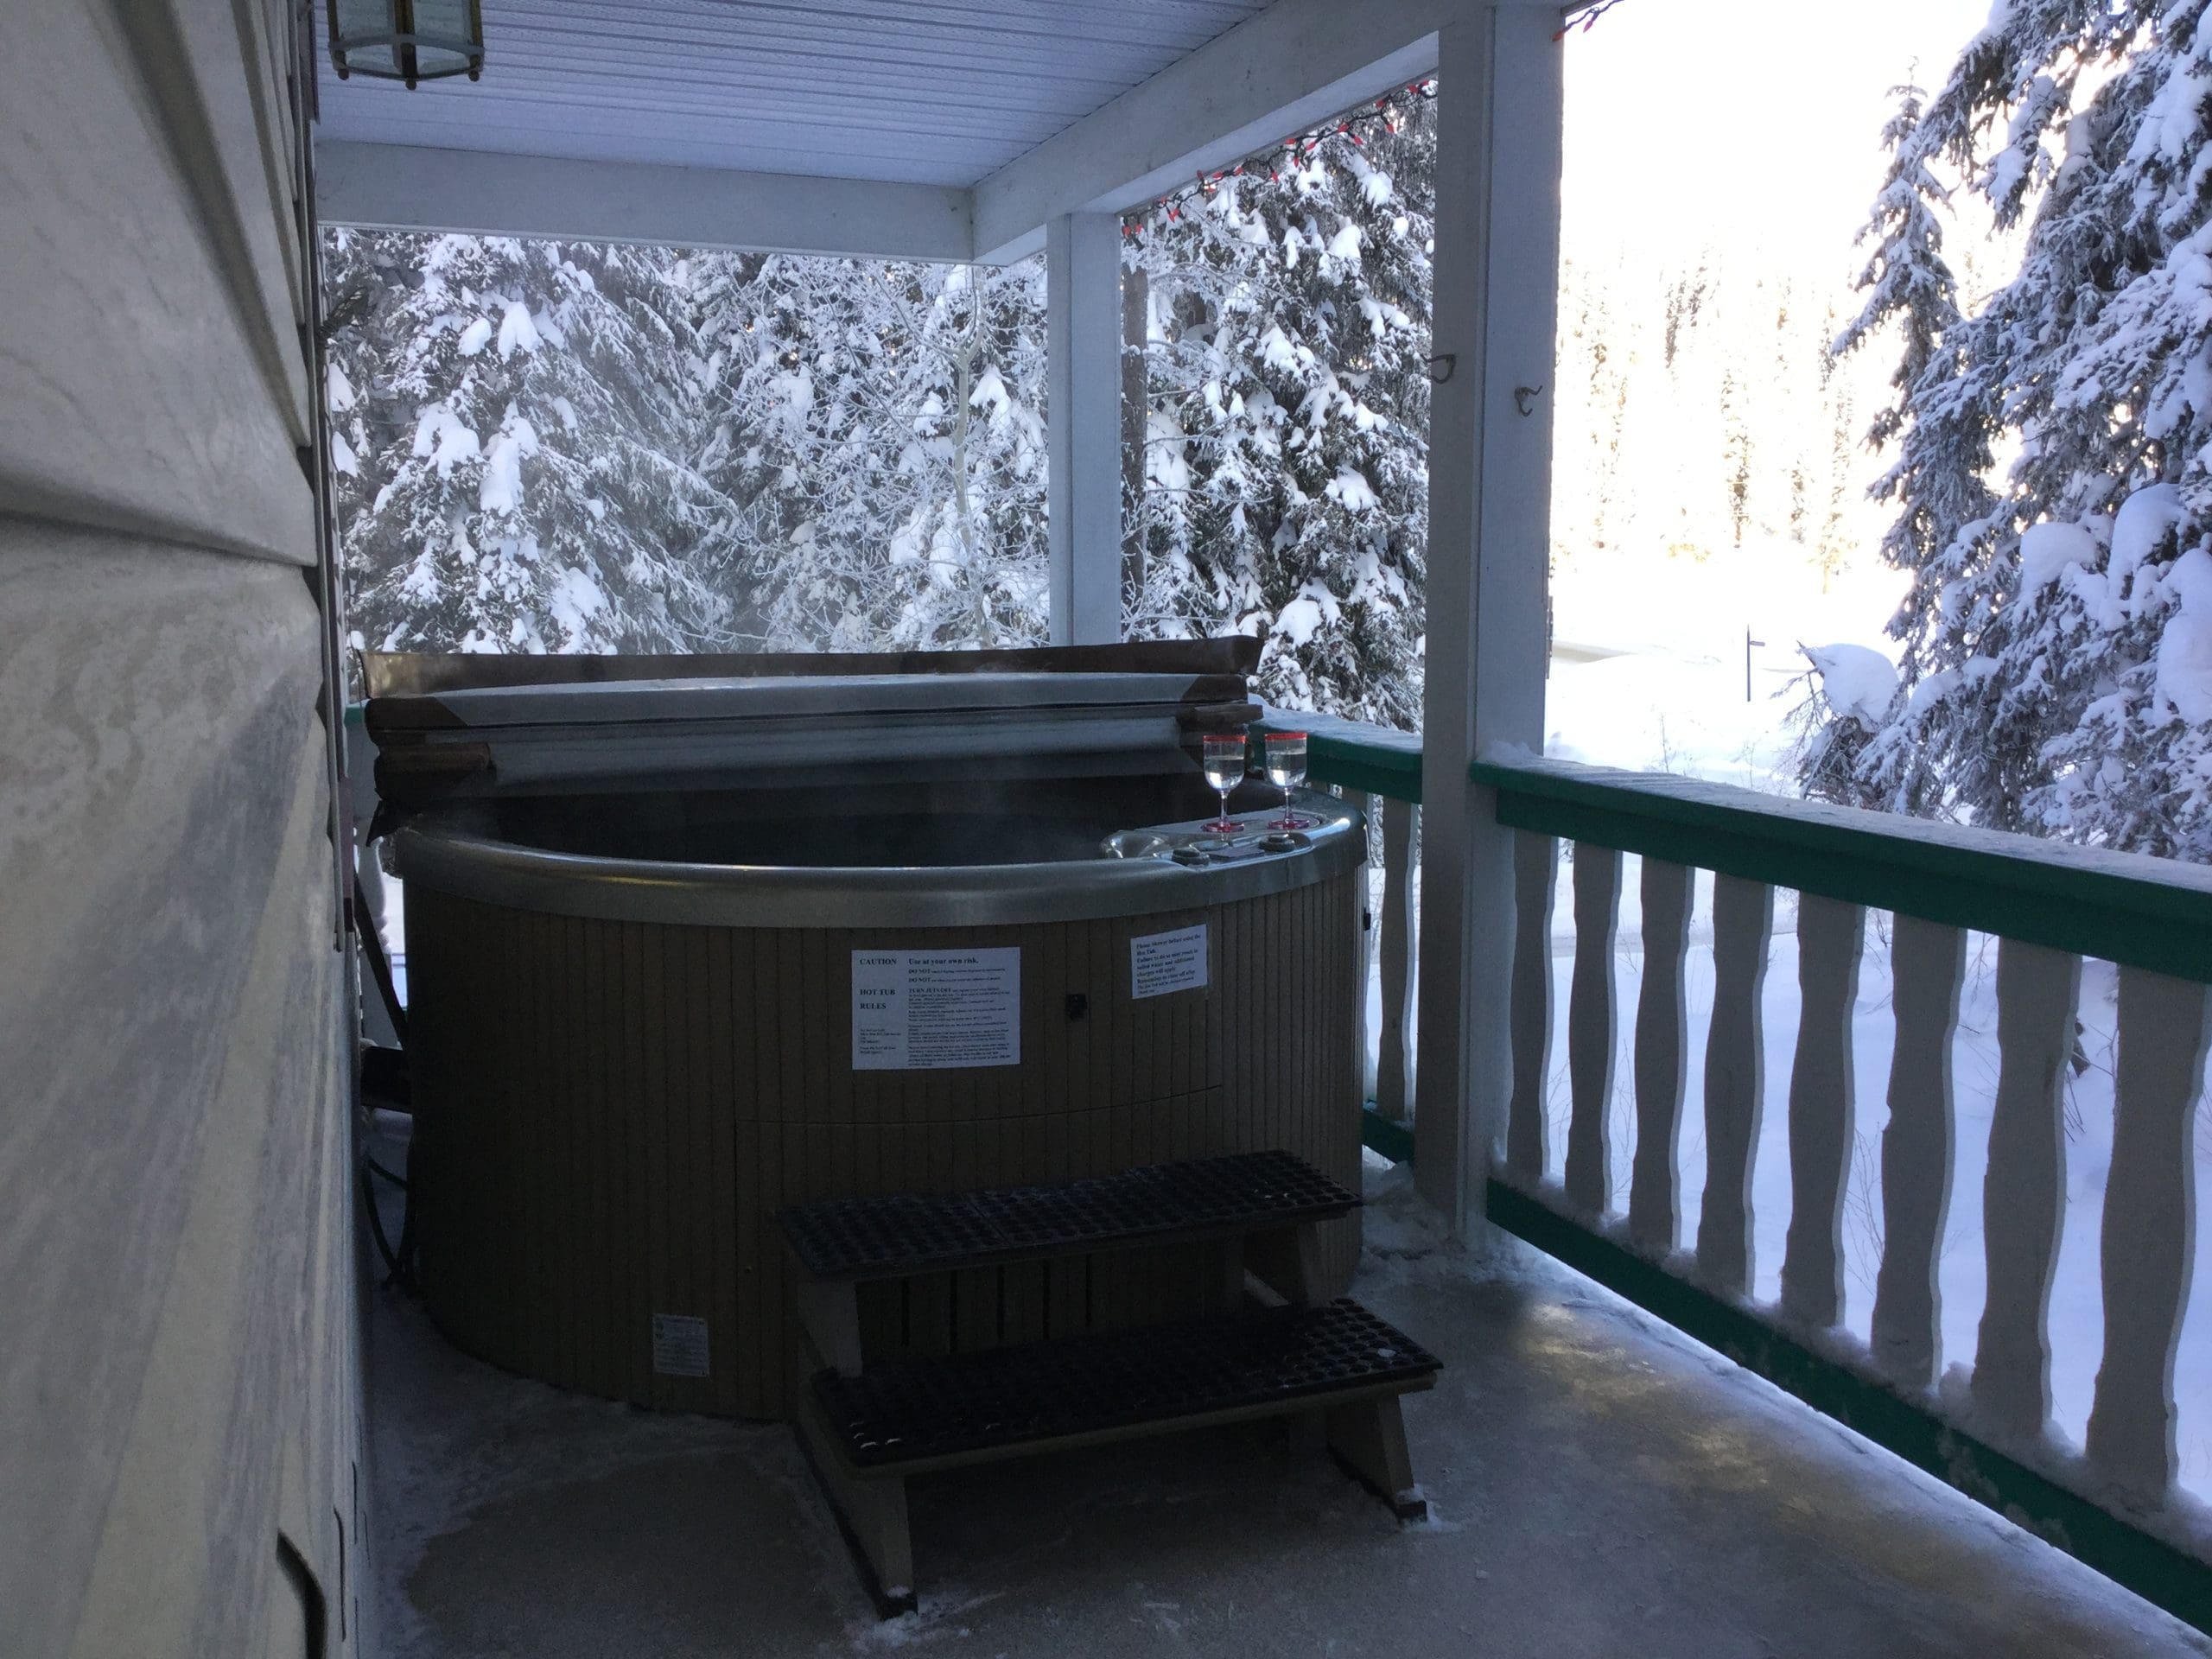 Private Upper Level Hot Tub on Deck with snow covered trees in the background. BBQ on Deck too.